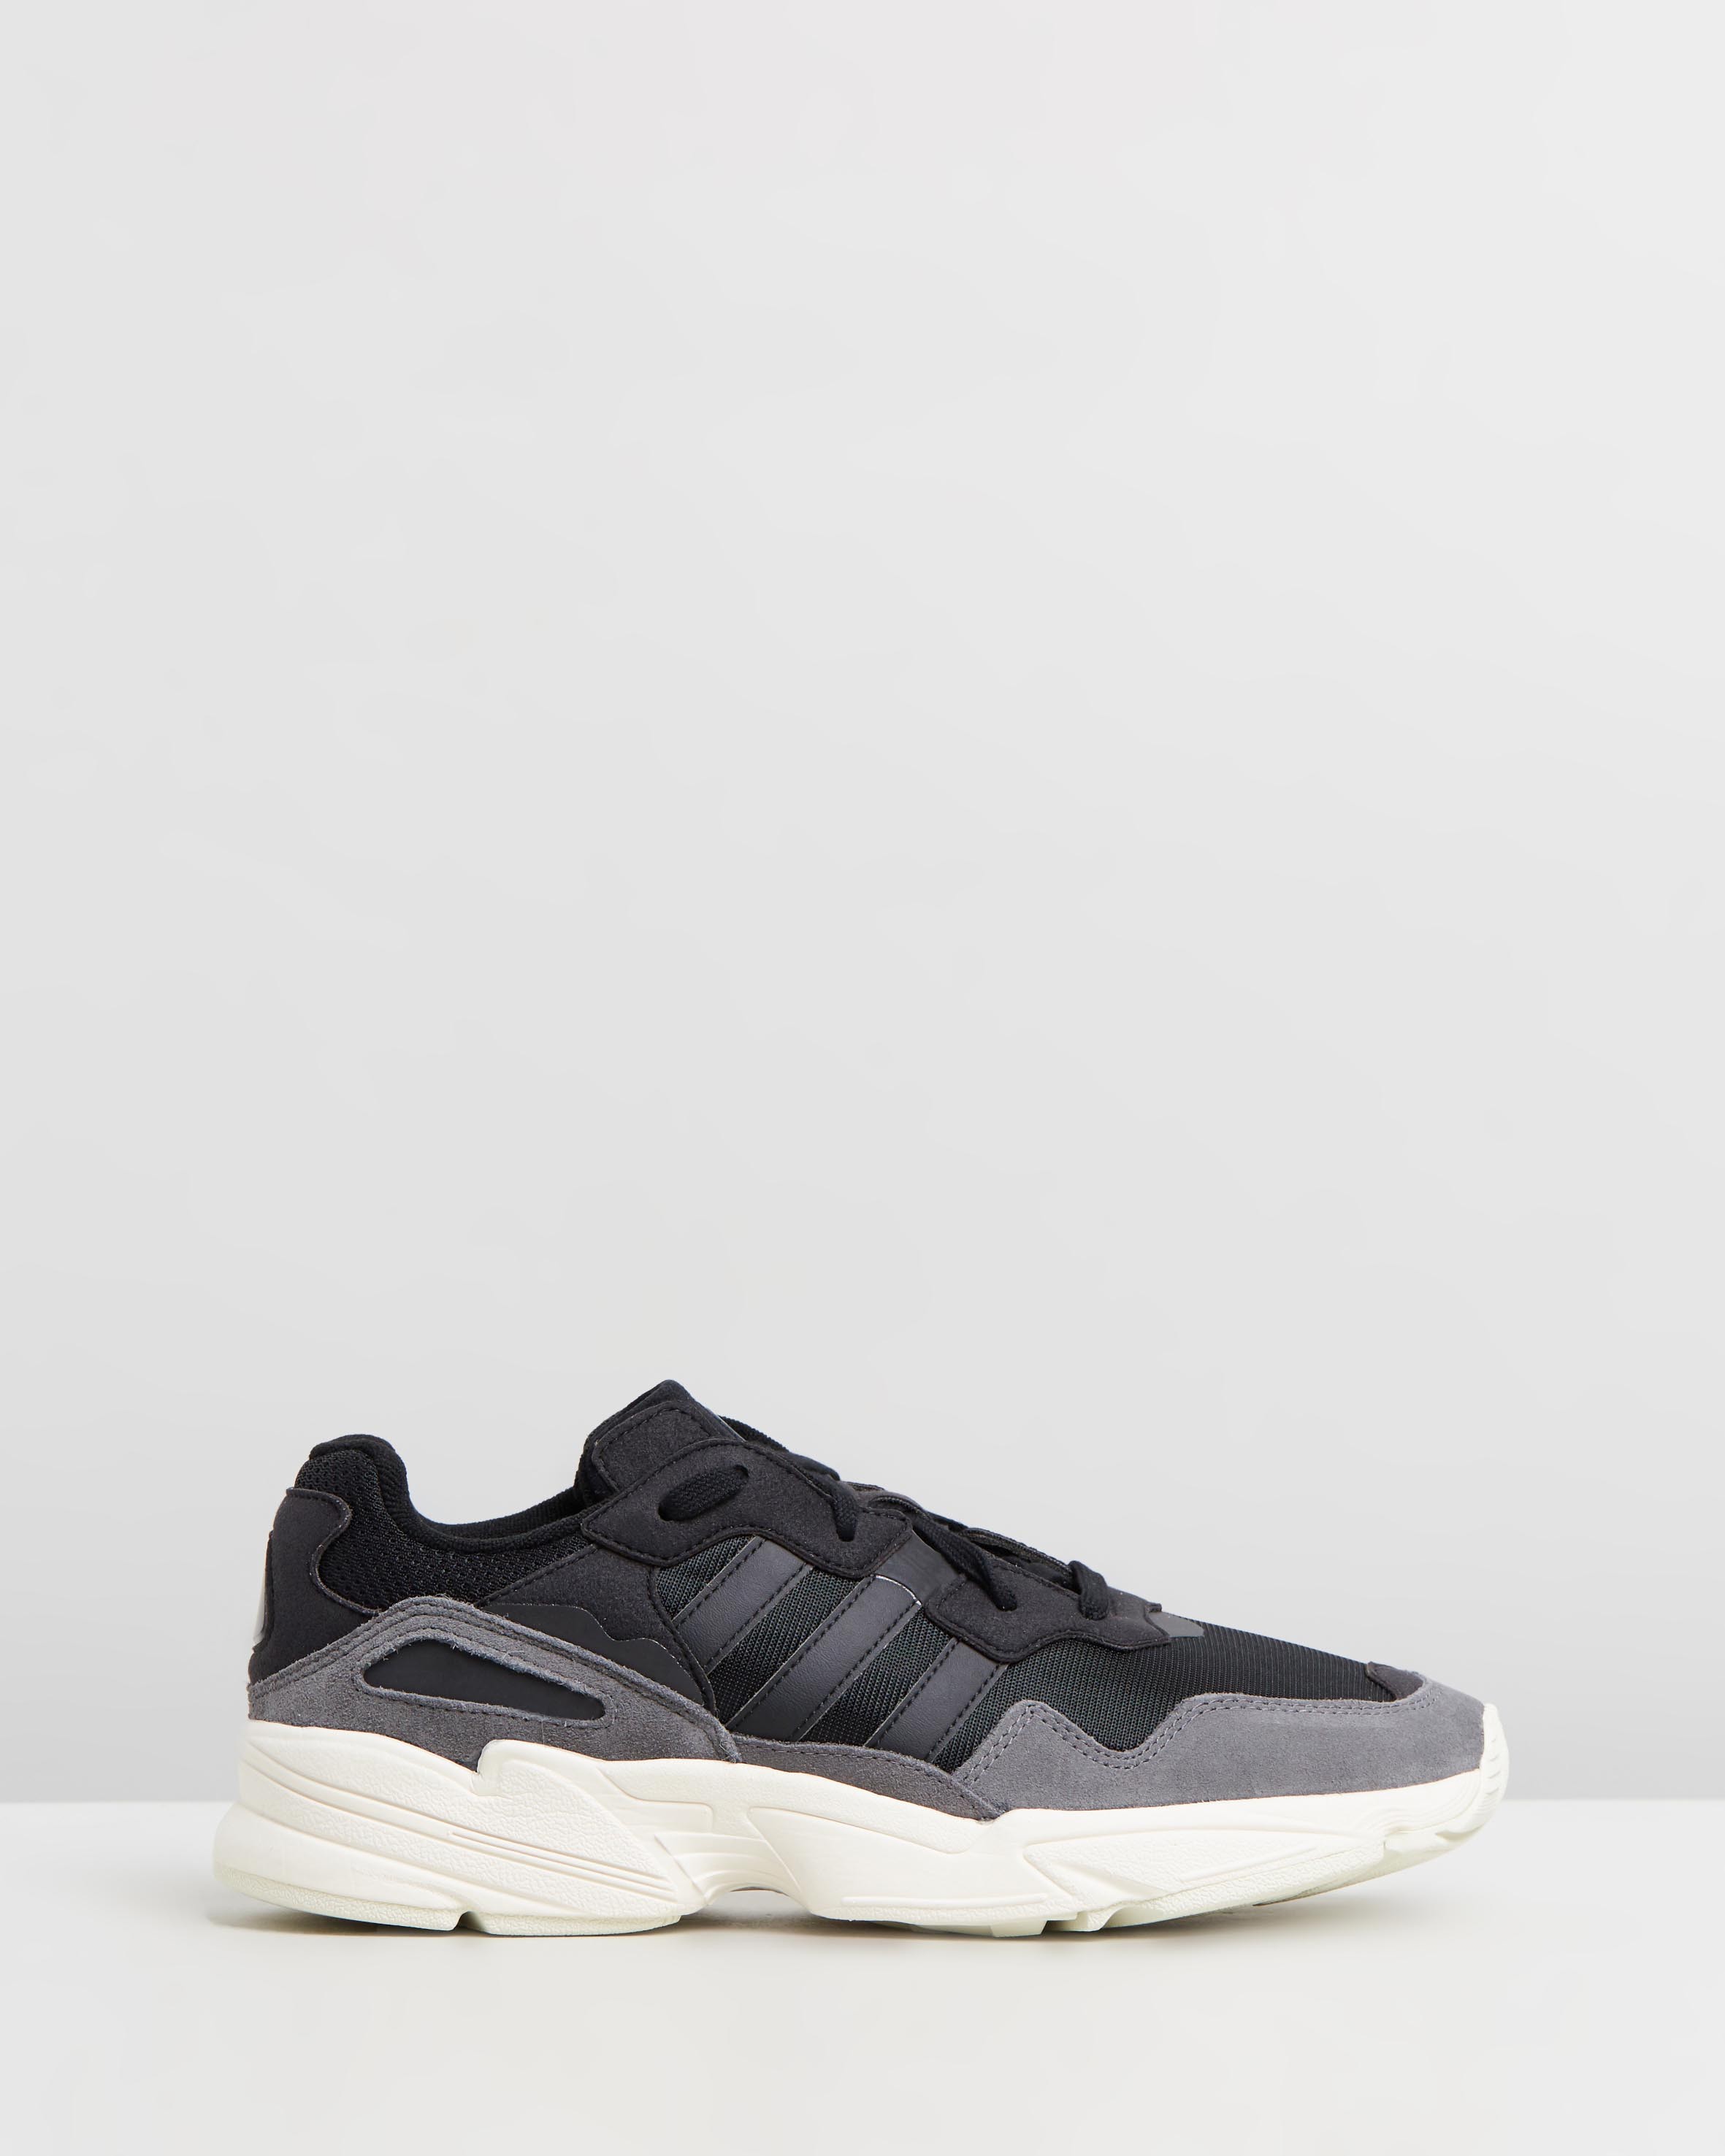 Yung-96 - Unisex Core Black & Off-White by Adidas Originals | ShoeSales